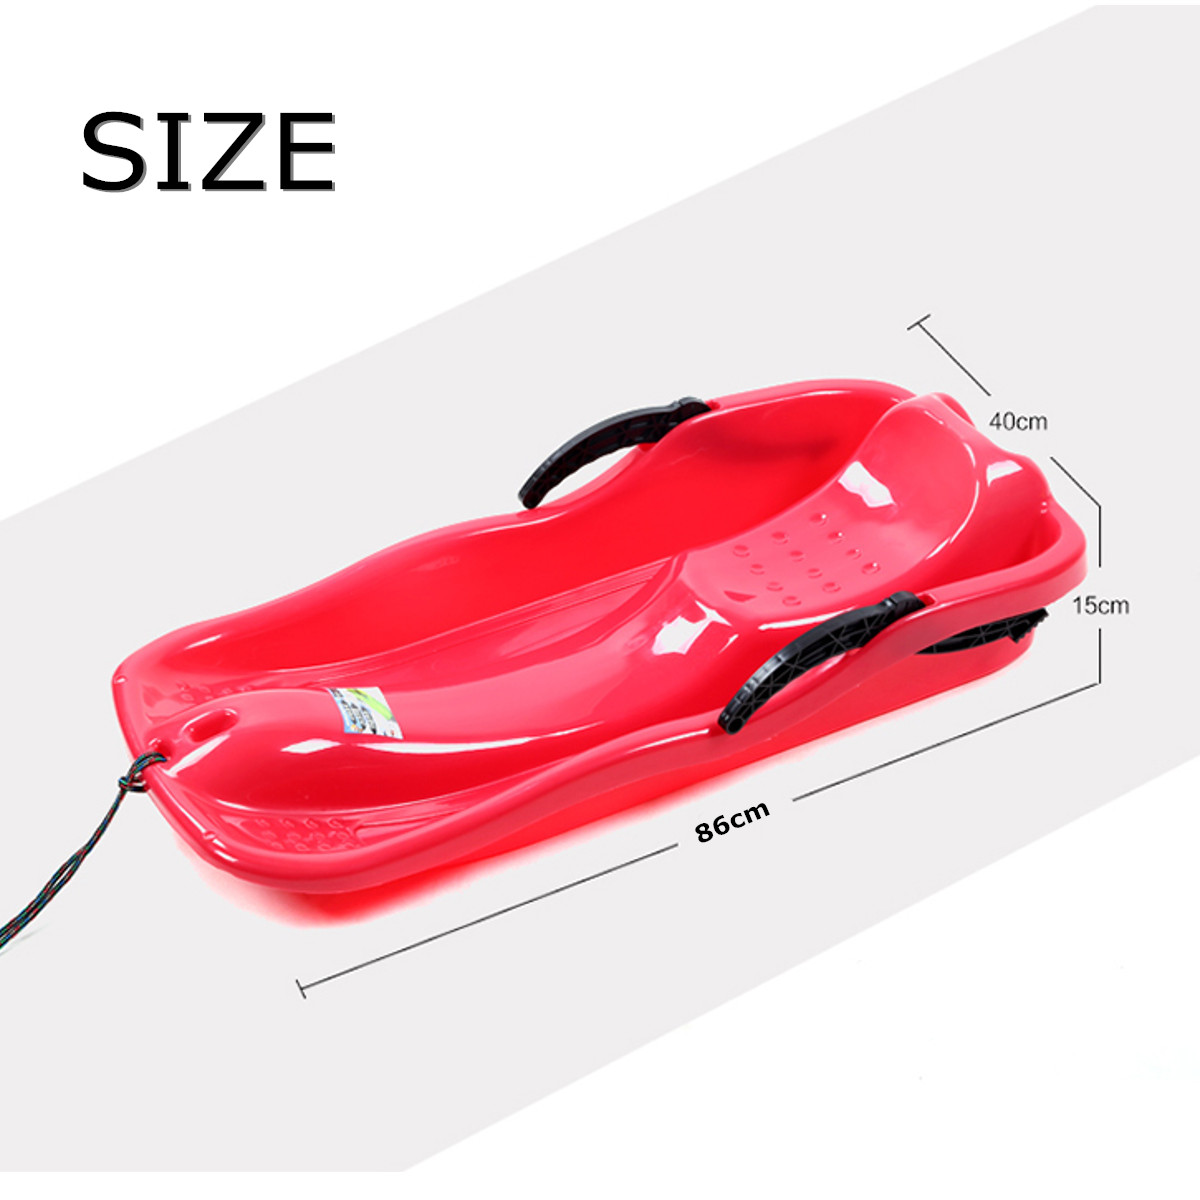 Outdoor-Plastic-Skiing-Board-Sled-Luge-Snow-Grass-Sand-Board-Pad-With-Rope-For-Double-People-1355099